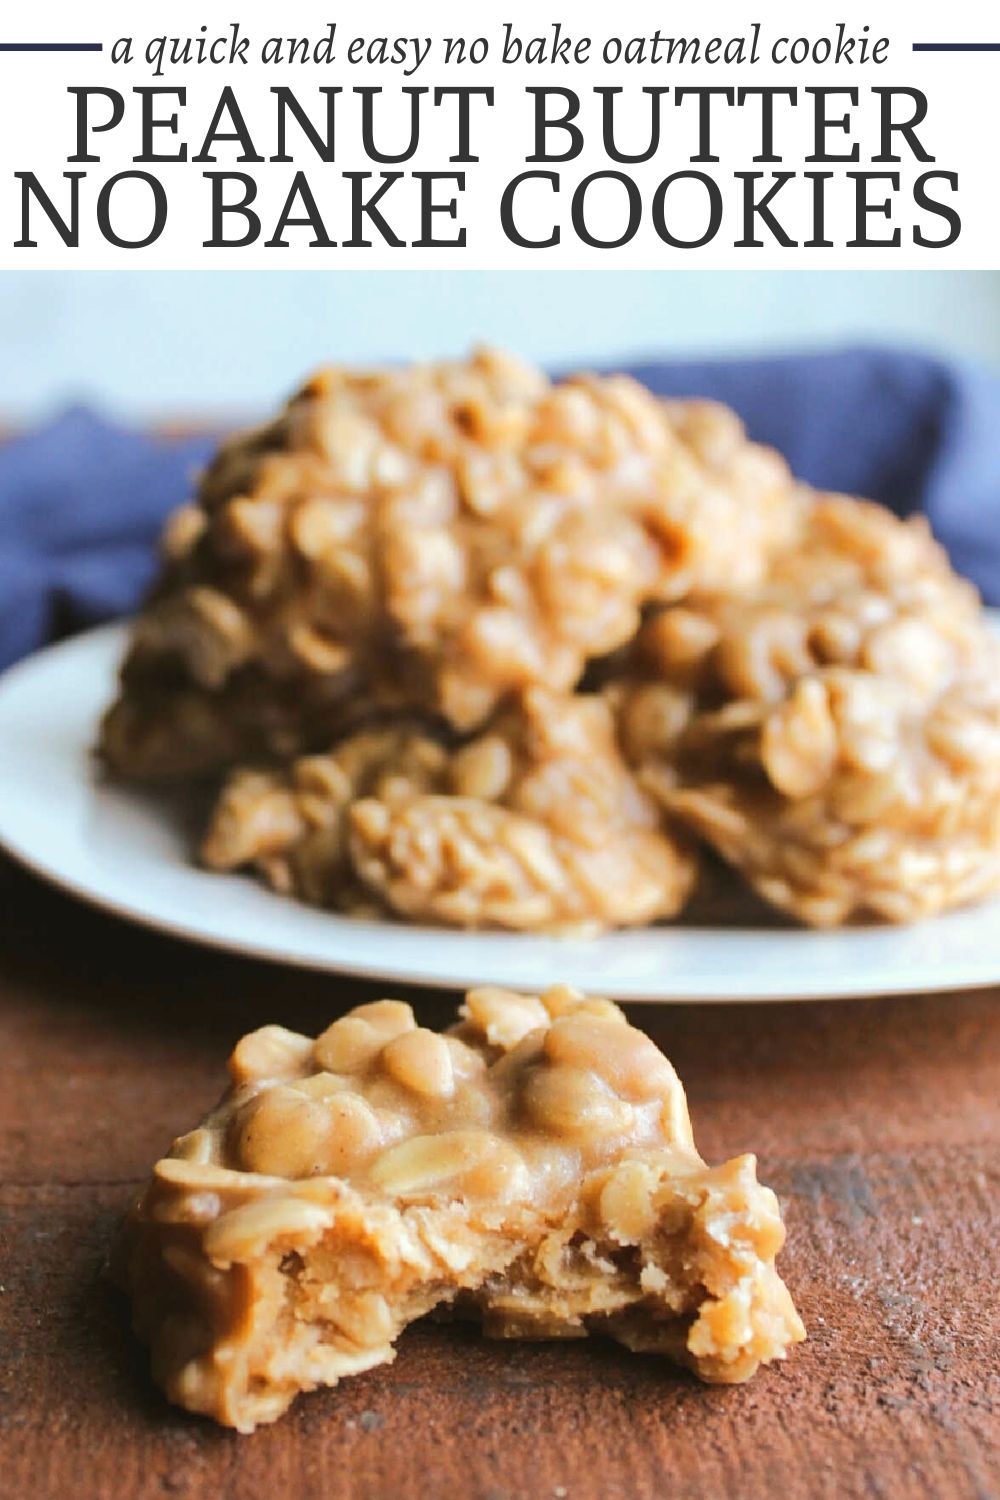 Peanut butter no-bake cookies are full of peanut butter flavor and rolled oat goodness. They only require a few simple ingredients, and are incredibly easy to make!